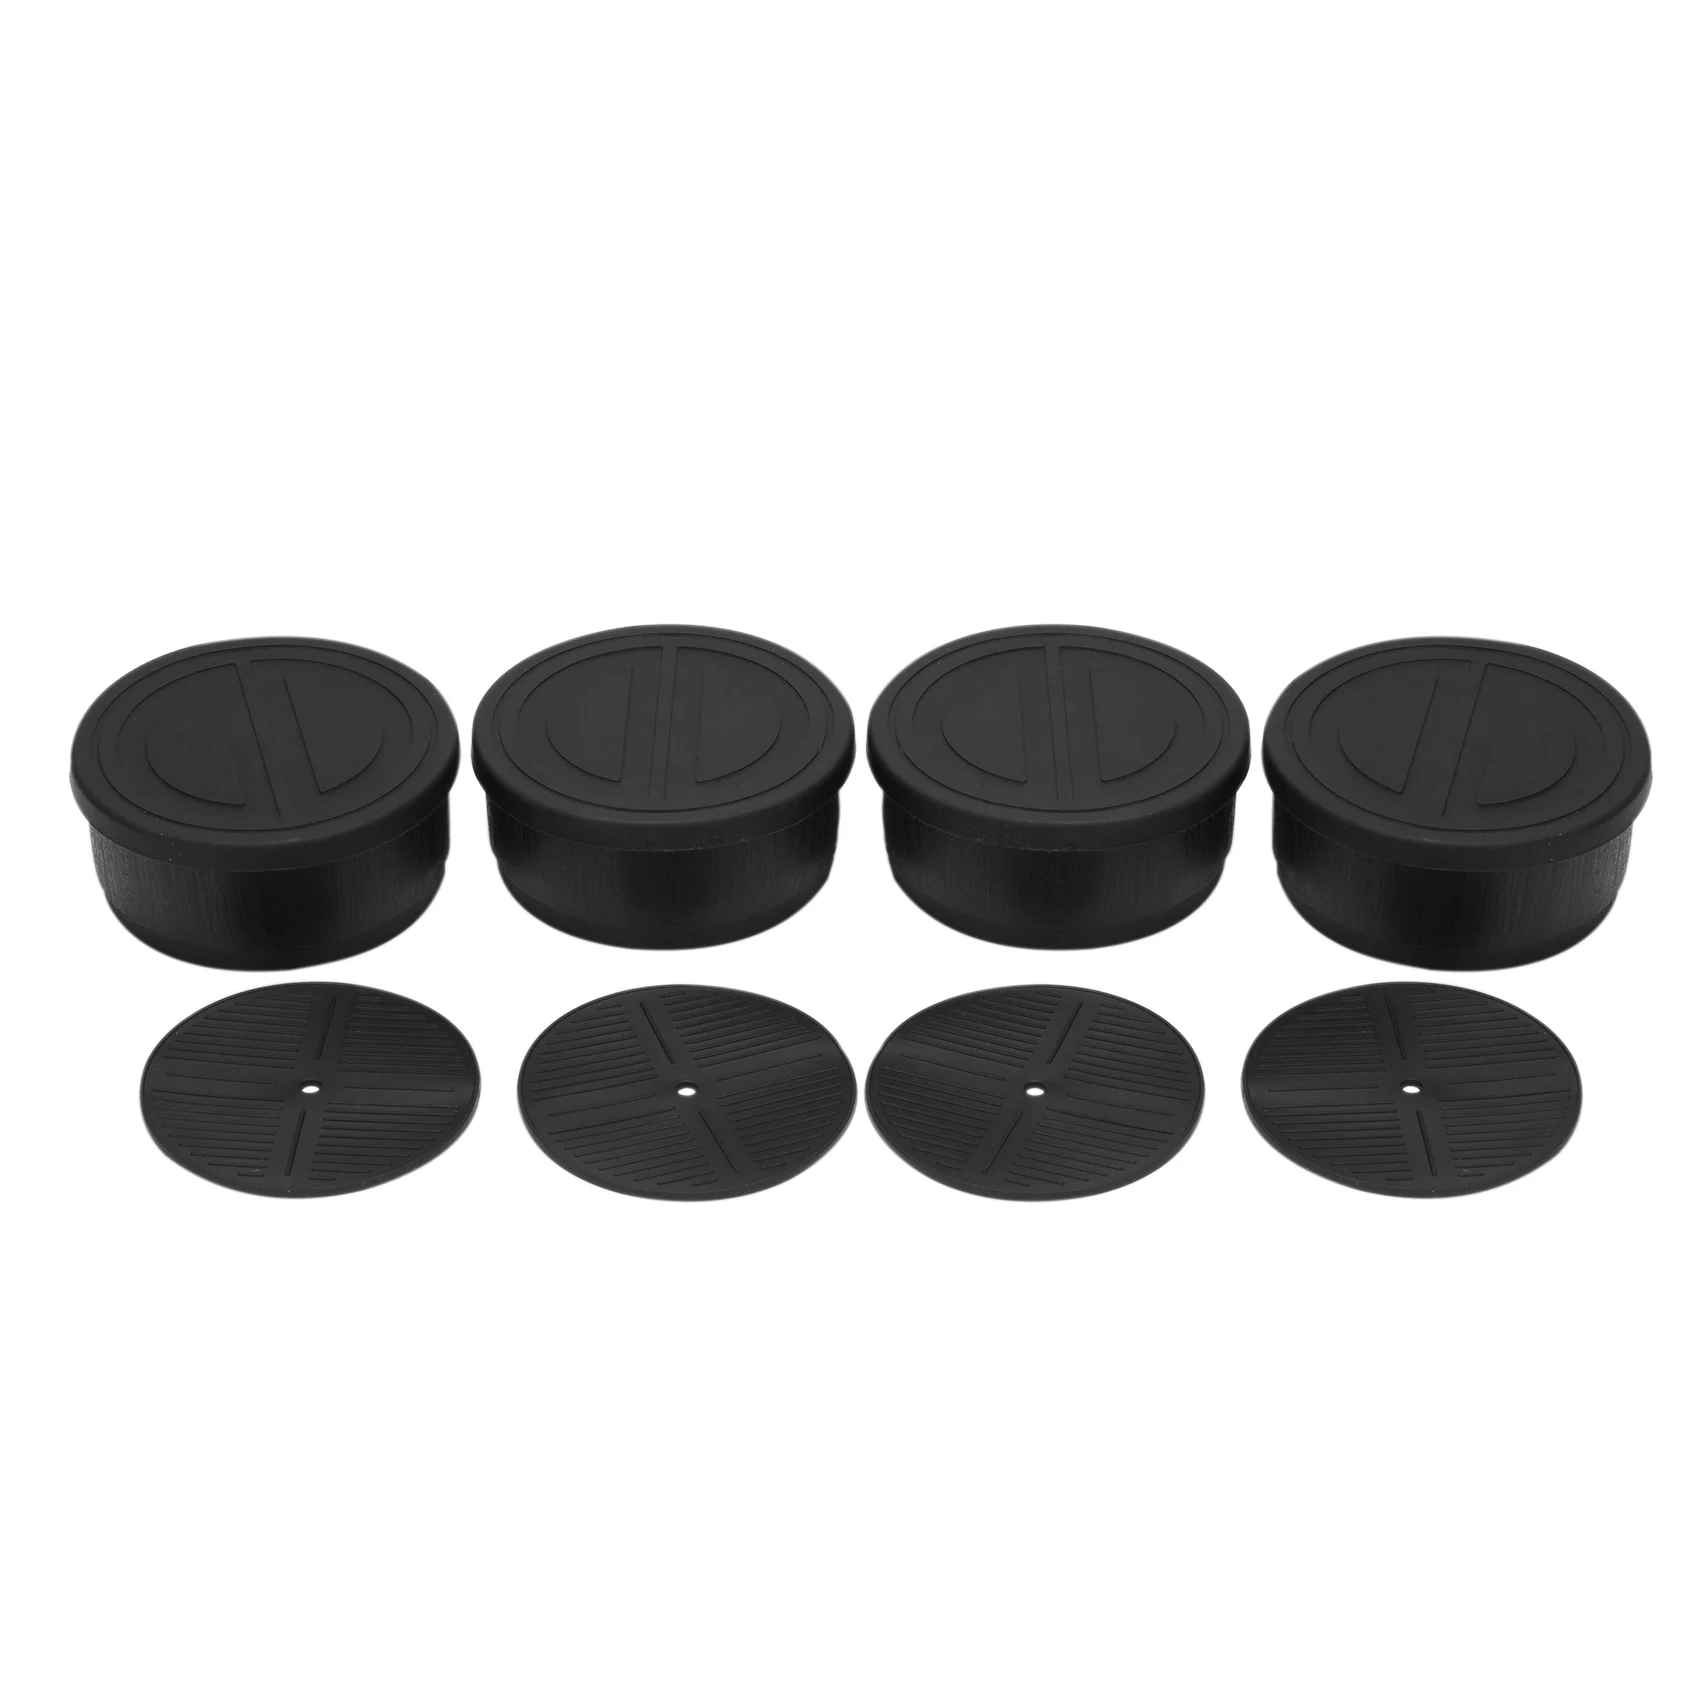 

Practical Bed Risers 1.7 Inch Heavy Duty Adjustable Furniture Risers For Sofa Table Fridge Round Lifts Supports (Black, 4 Piece)